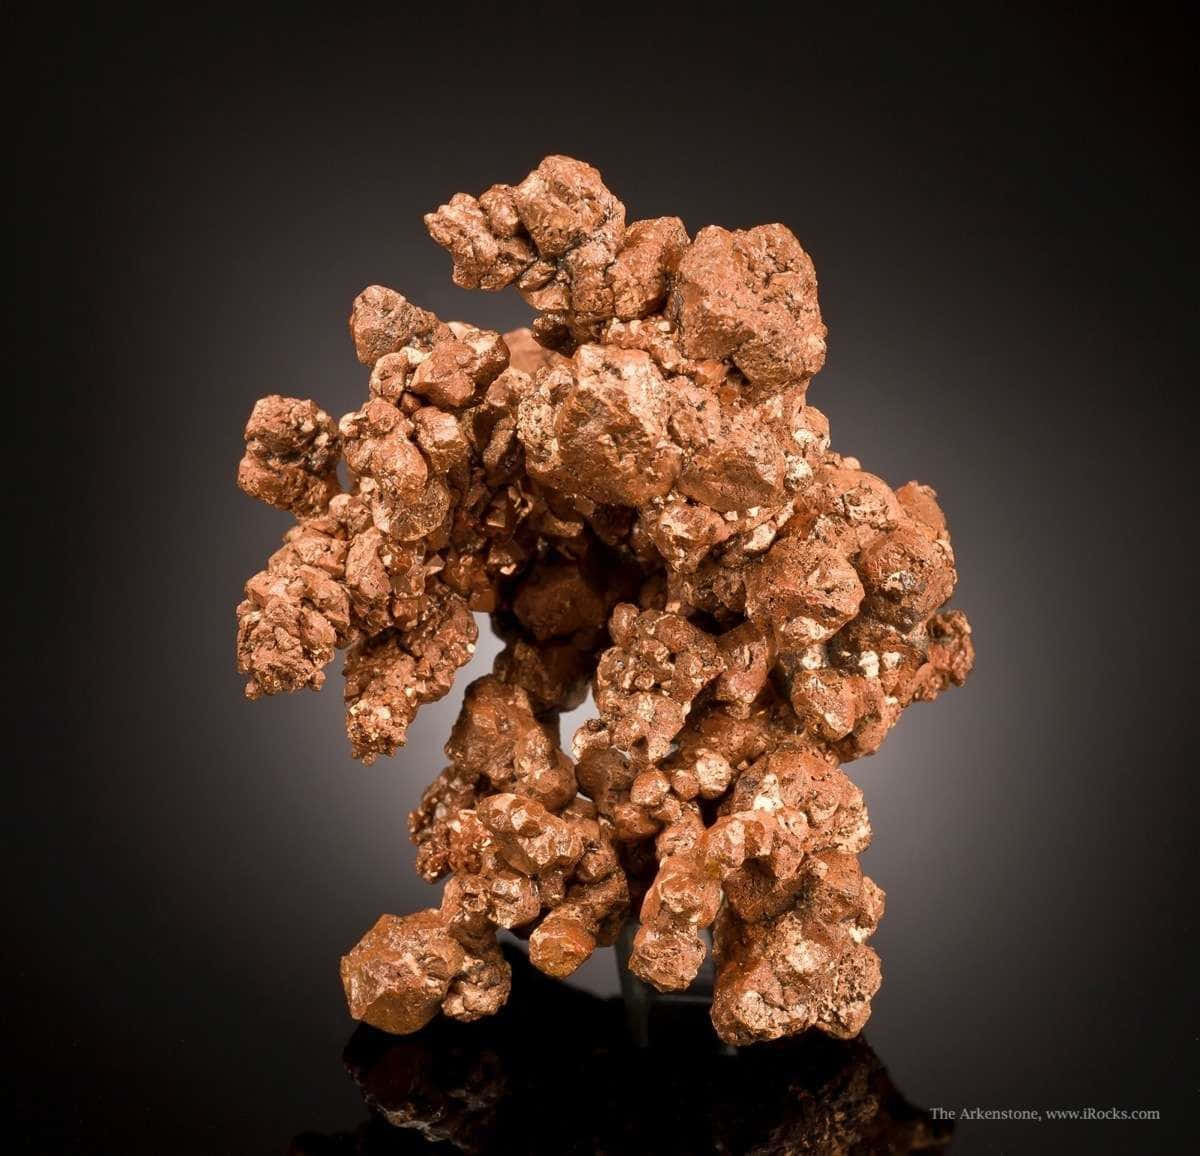 Native Copper Crystal Formation